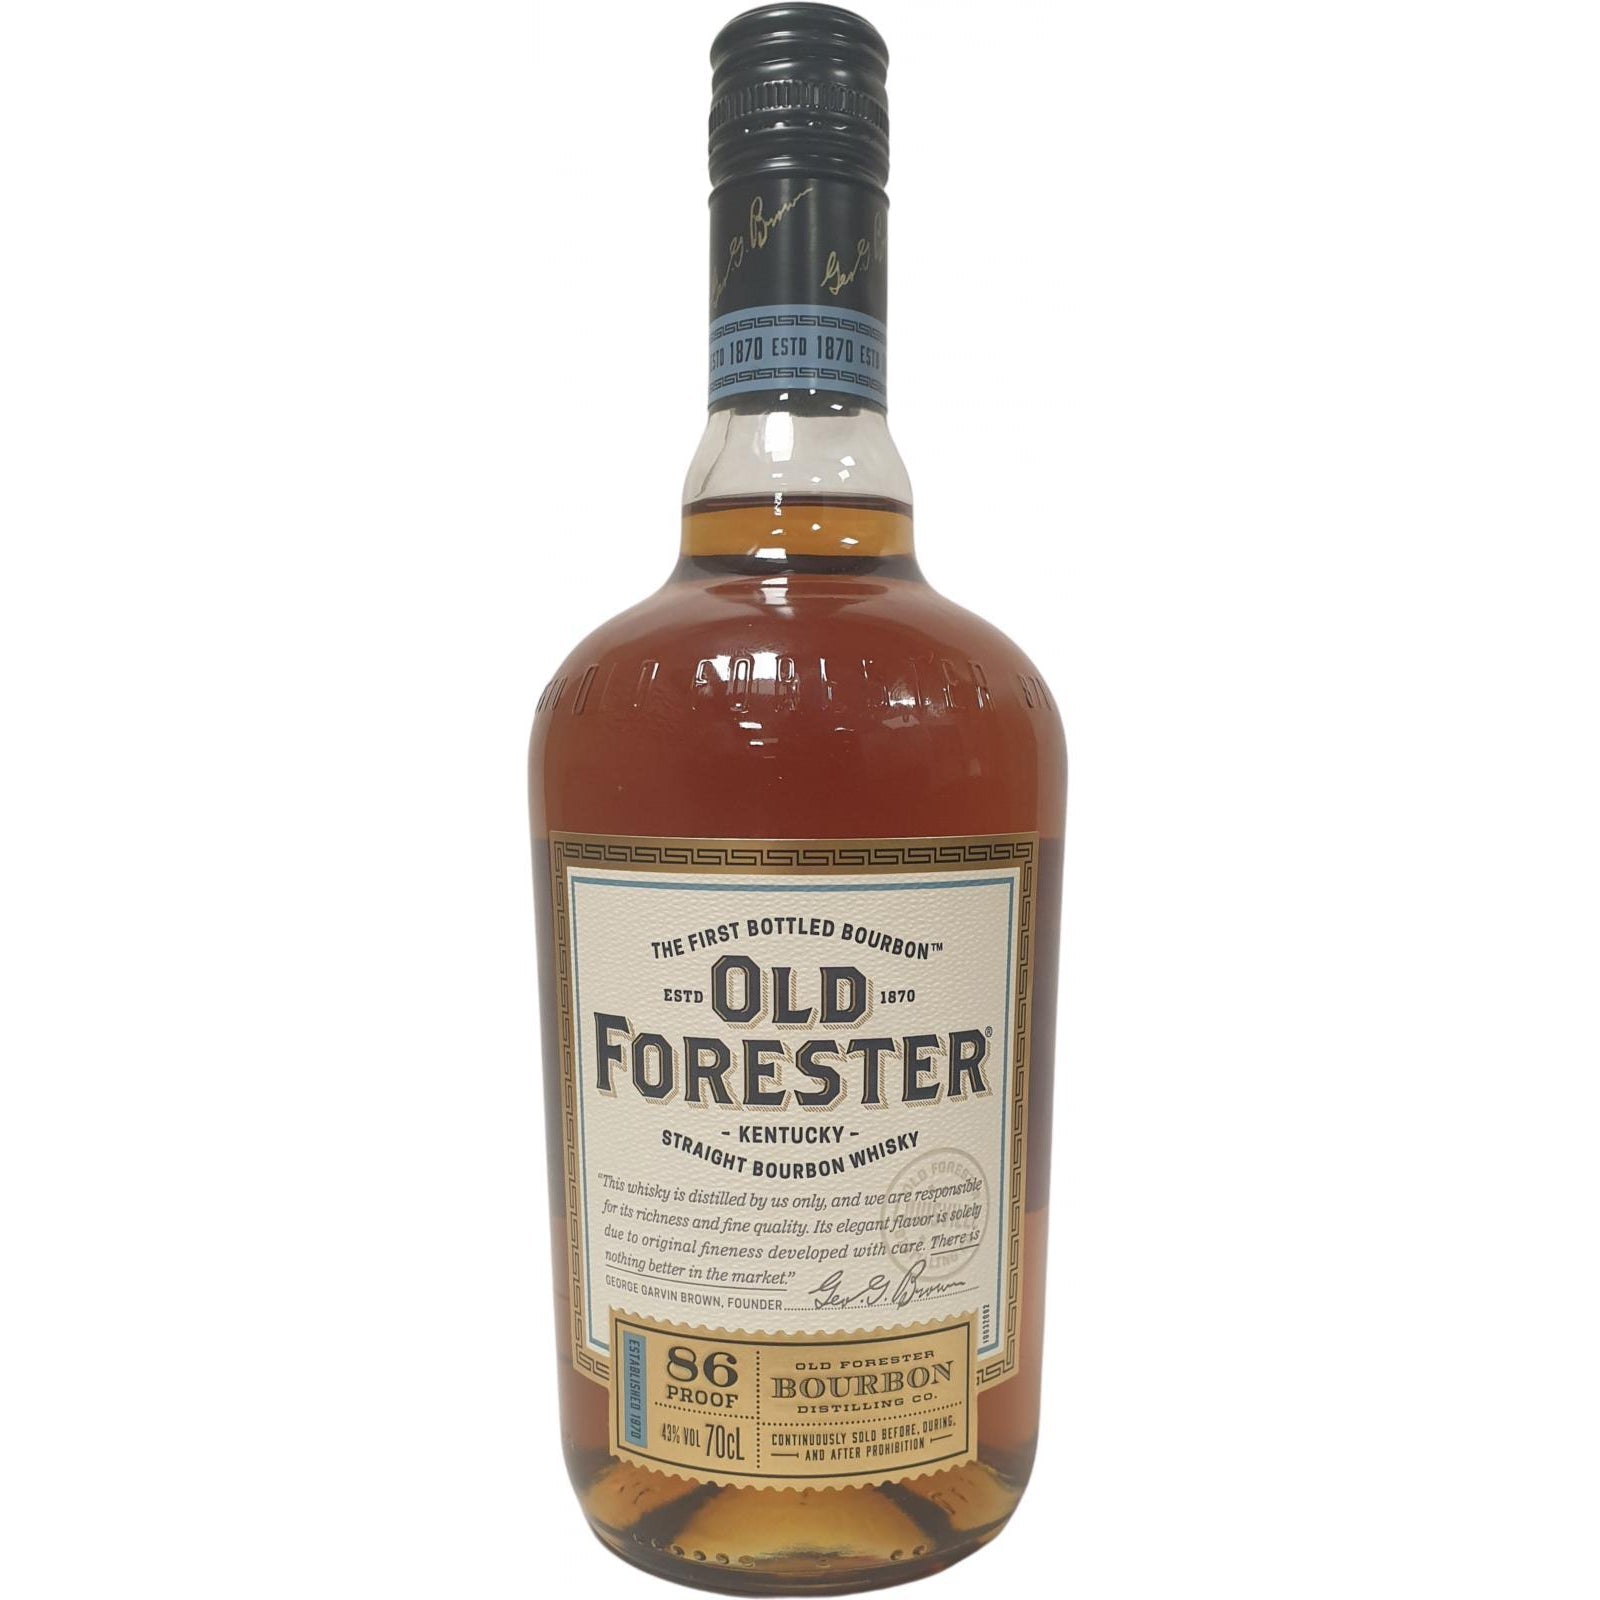 Old Forester Kentucky Straight Bourbon Whisky 43% Vol. 0,7l